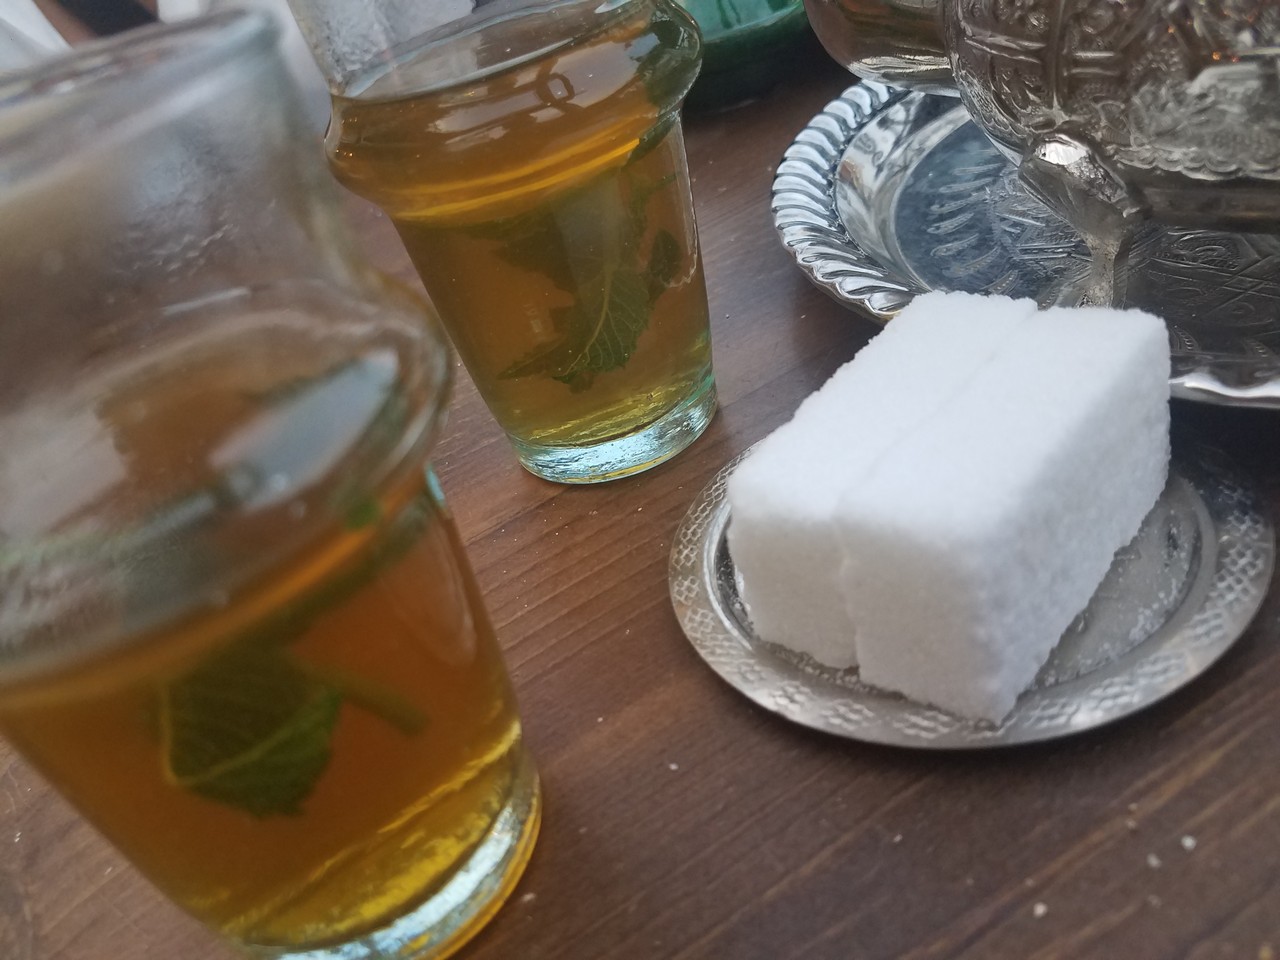 a plate of sugar cubes and a glass of tea